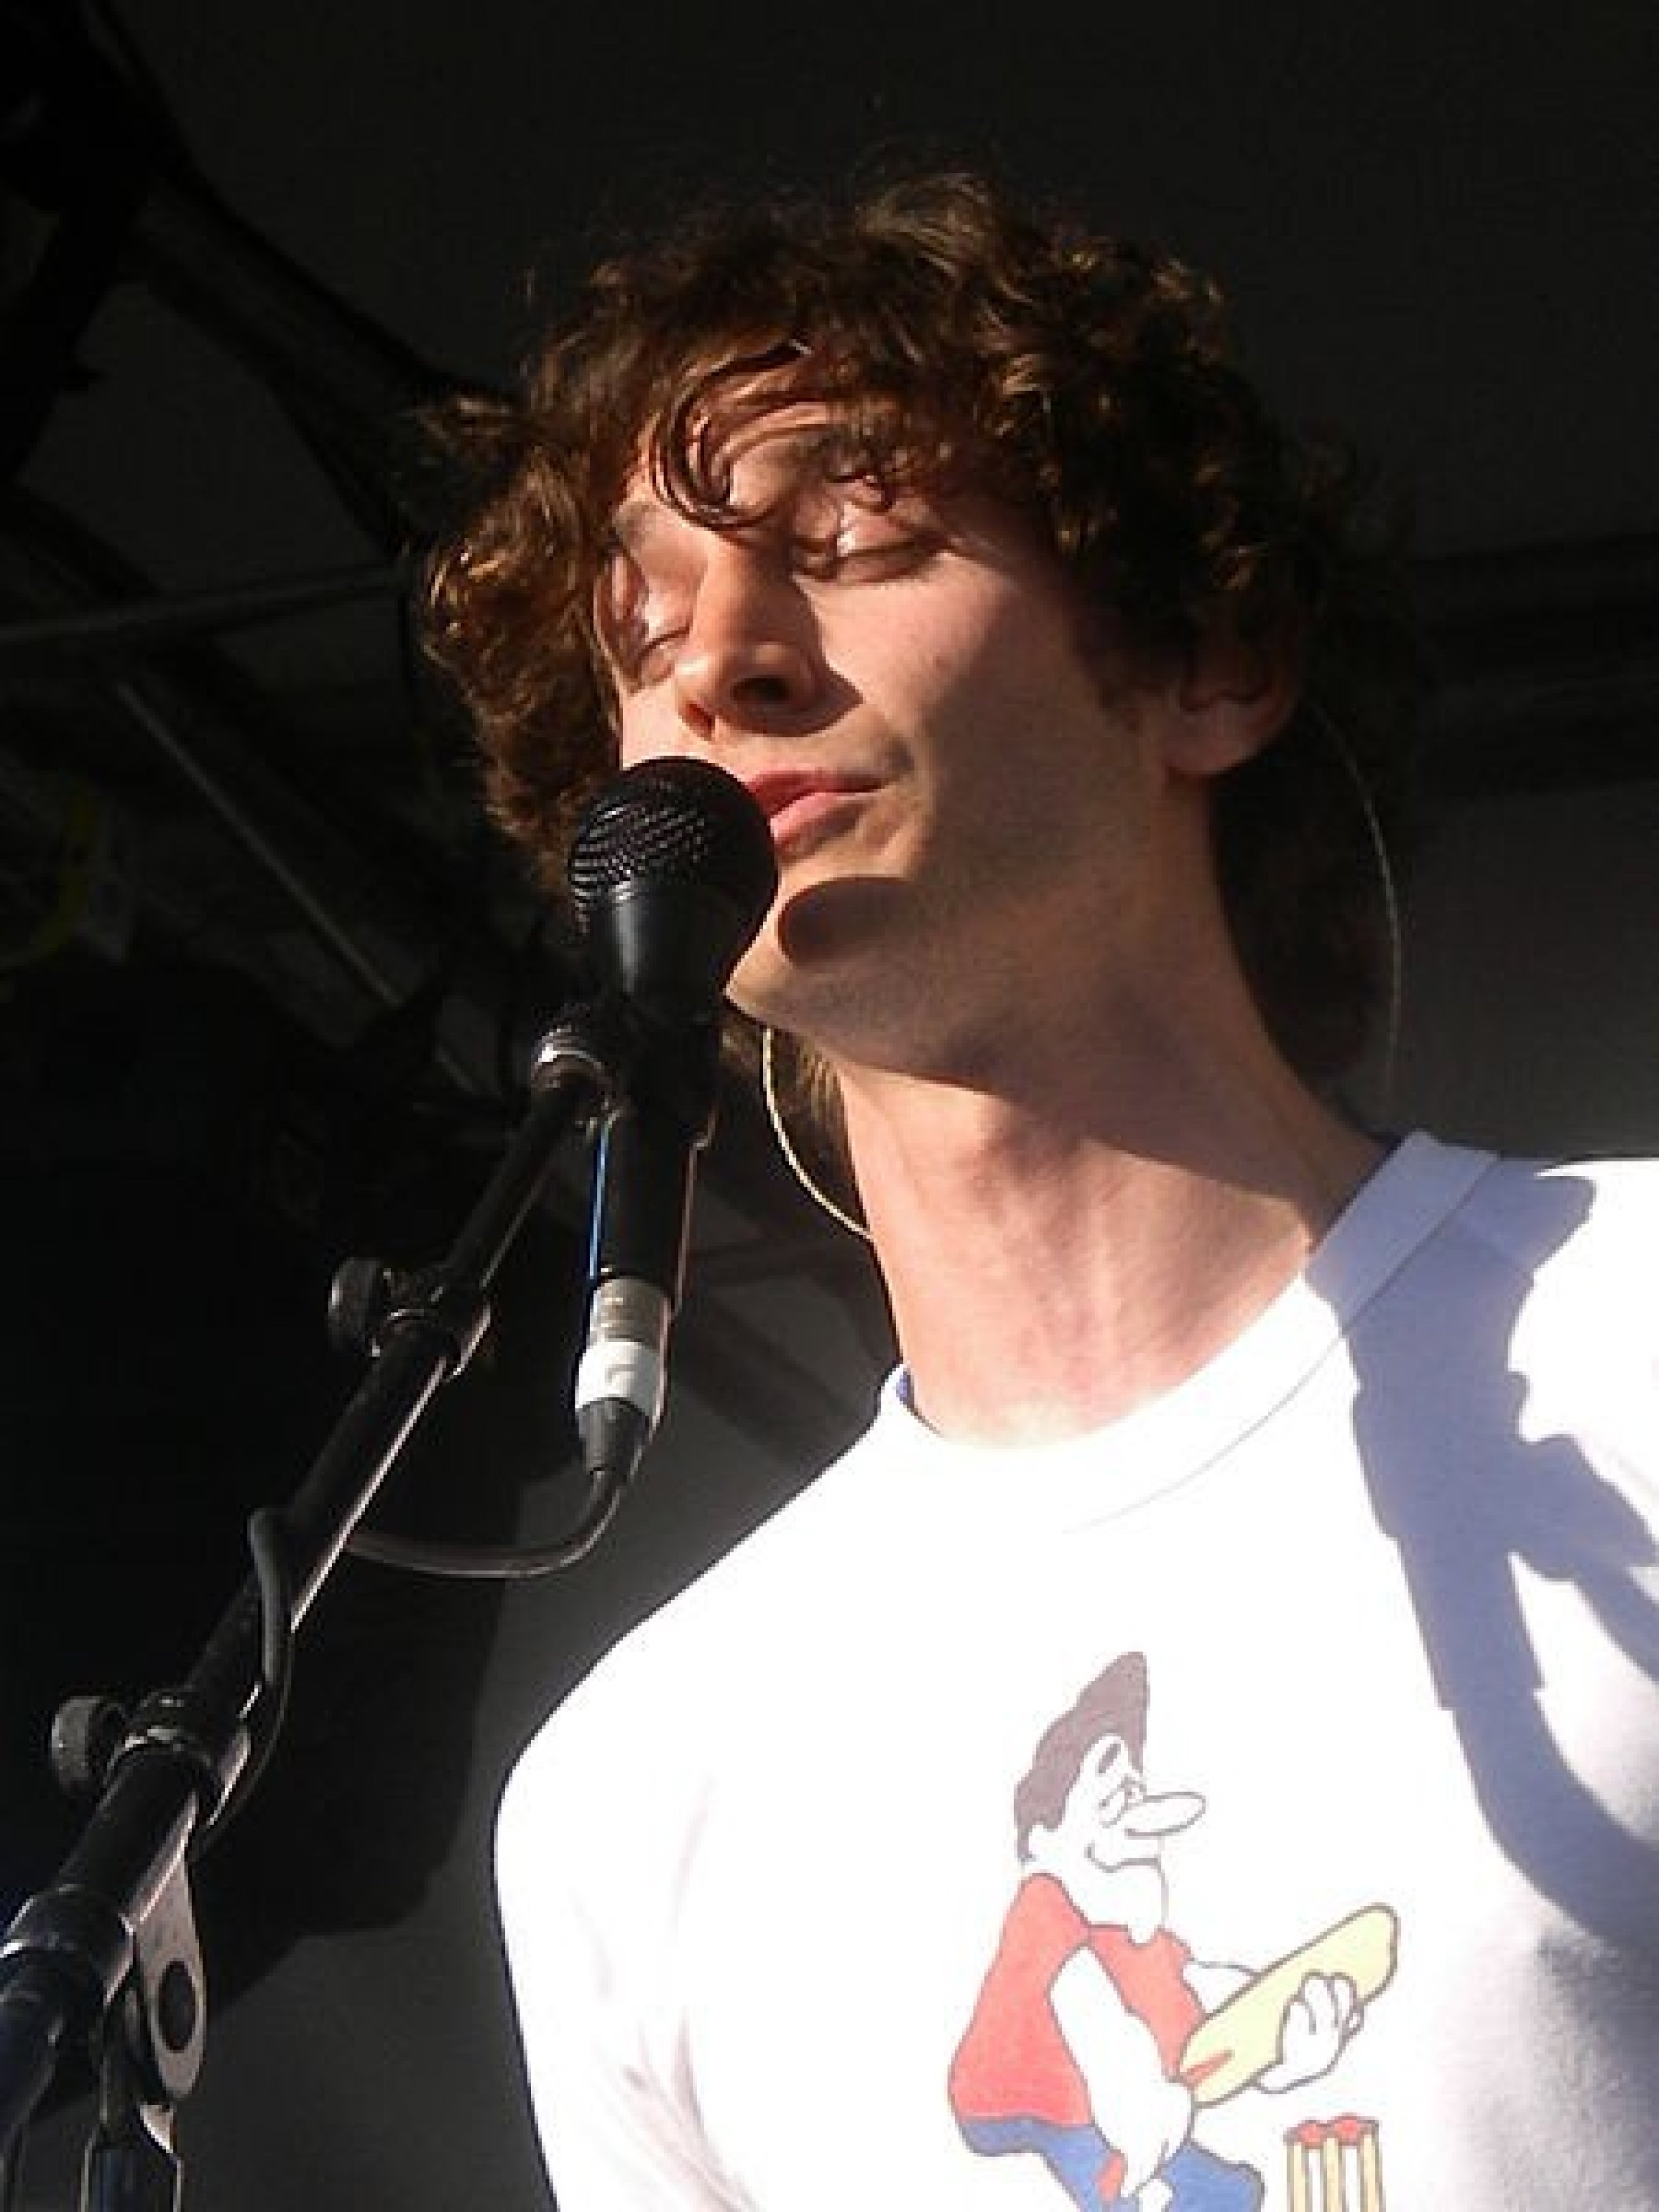 Gotye 5 Things To Know About the Up-And-Coming Musician VIDEO